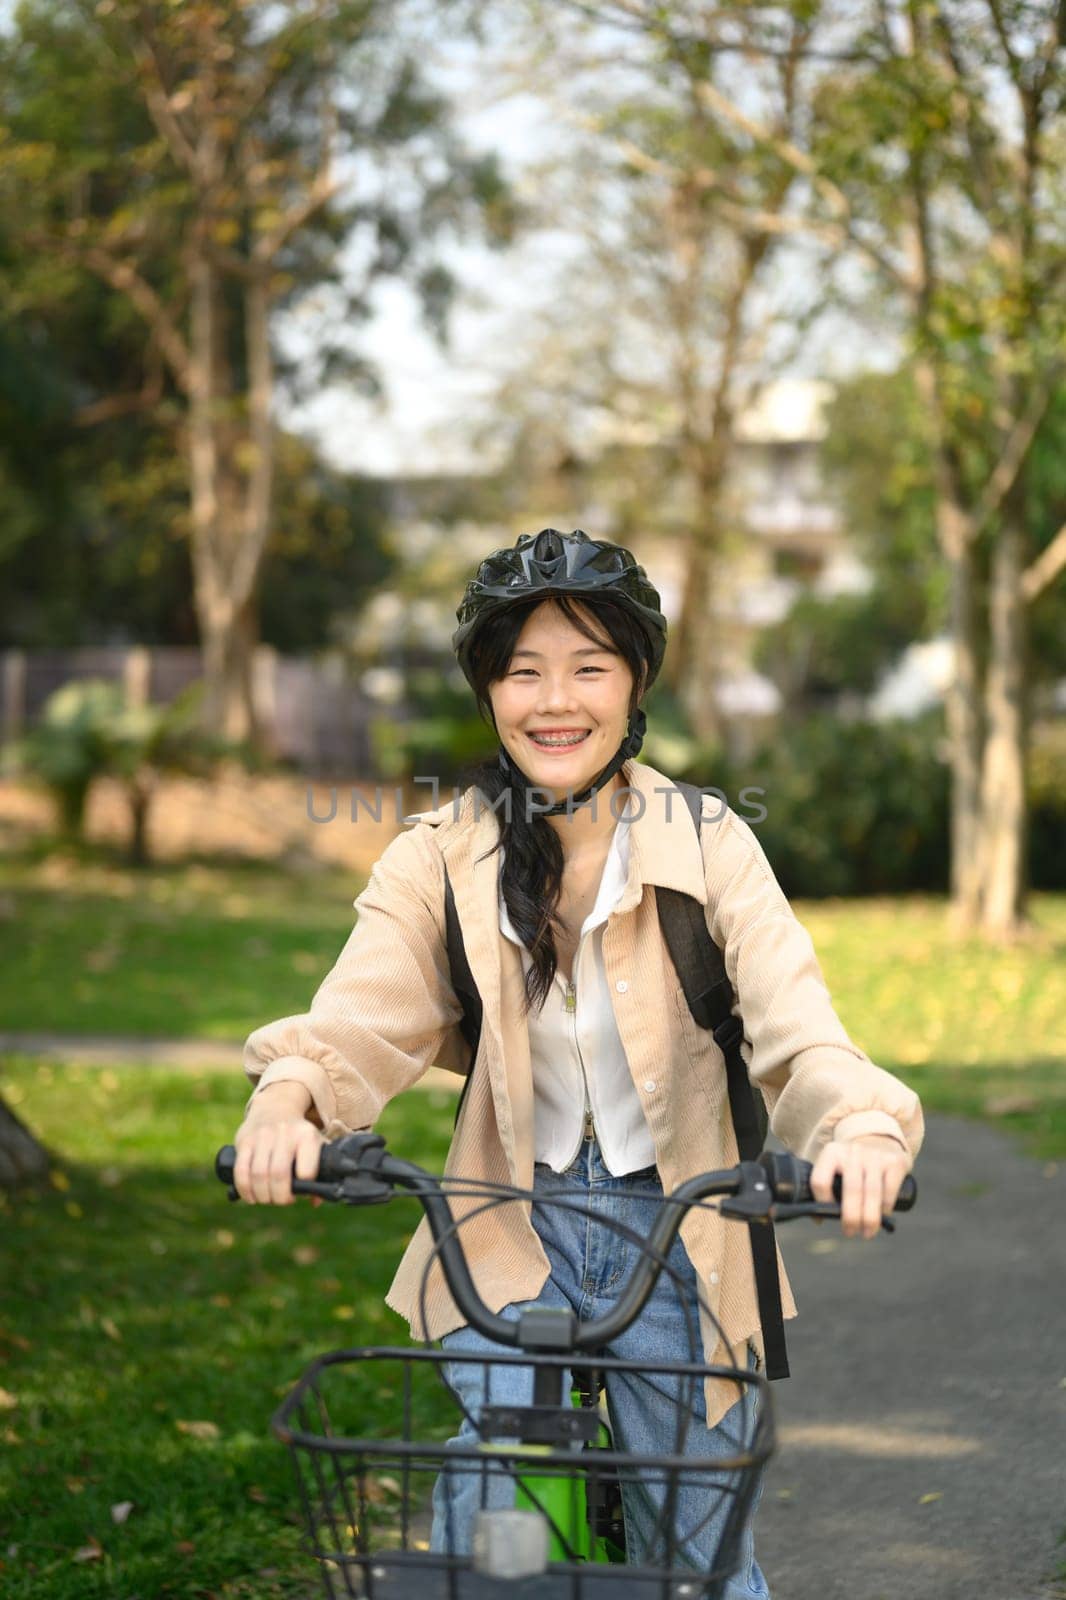 Happy smiling young female student in safety helmet riding a bicycle through the city park.